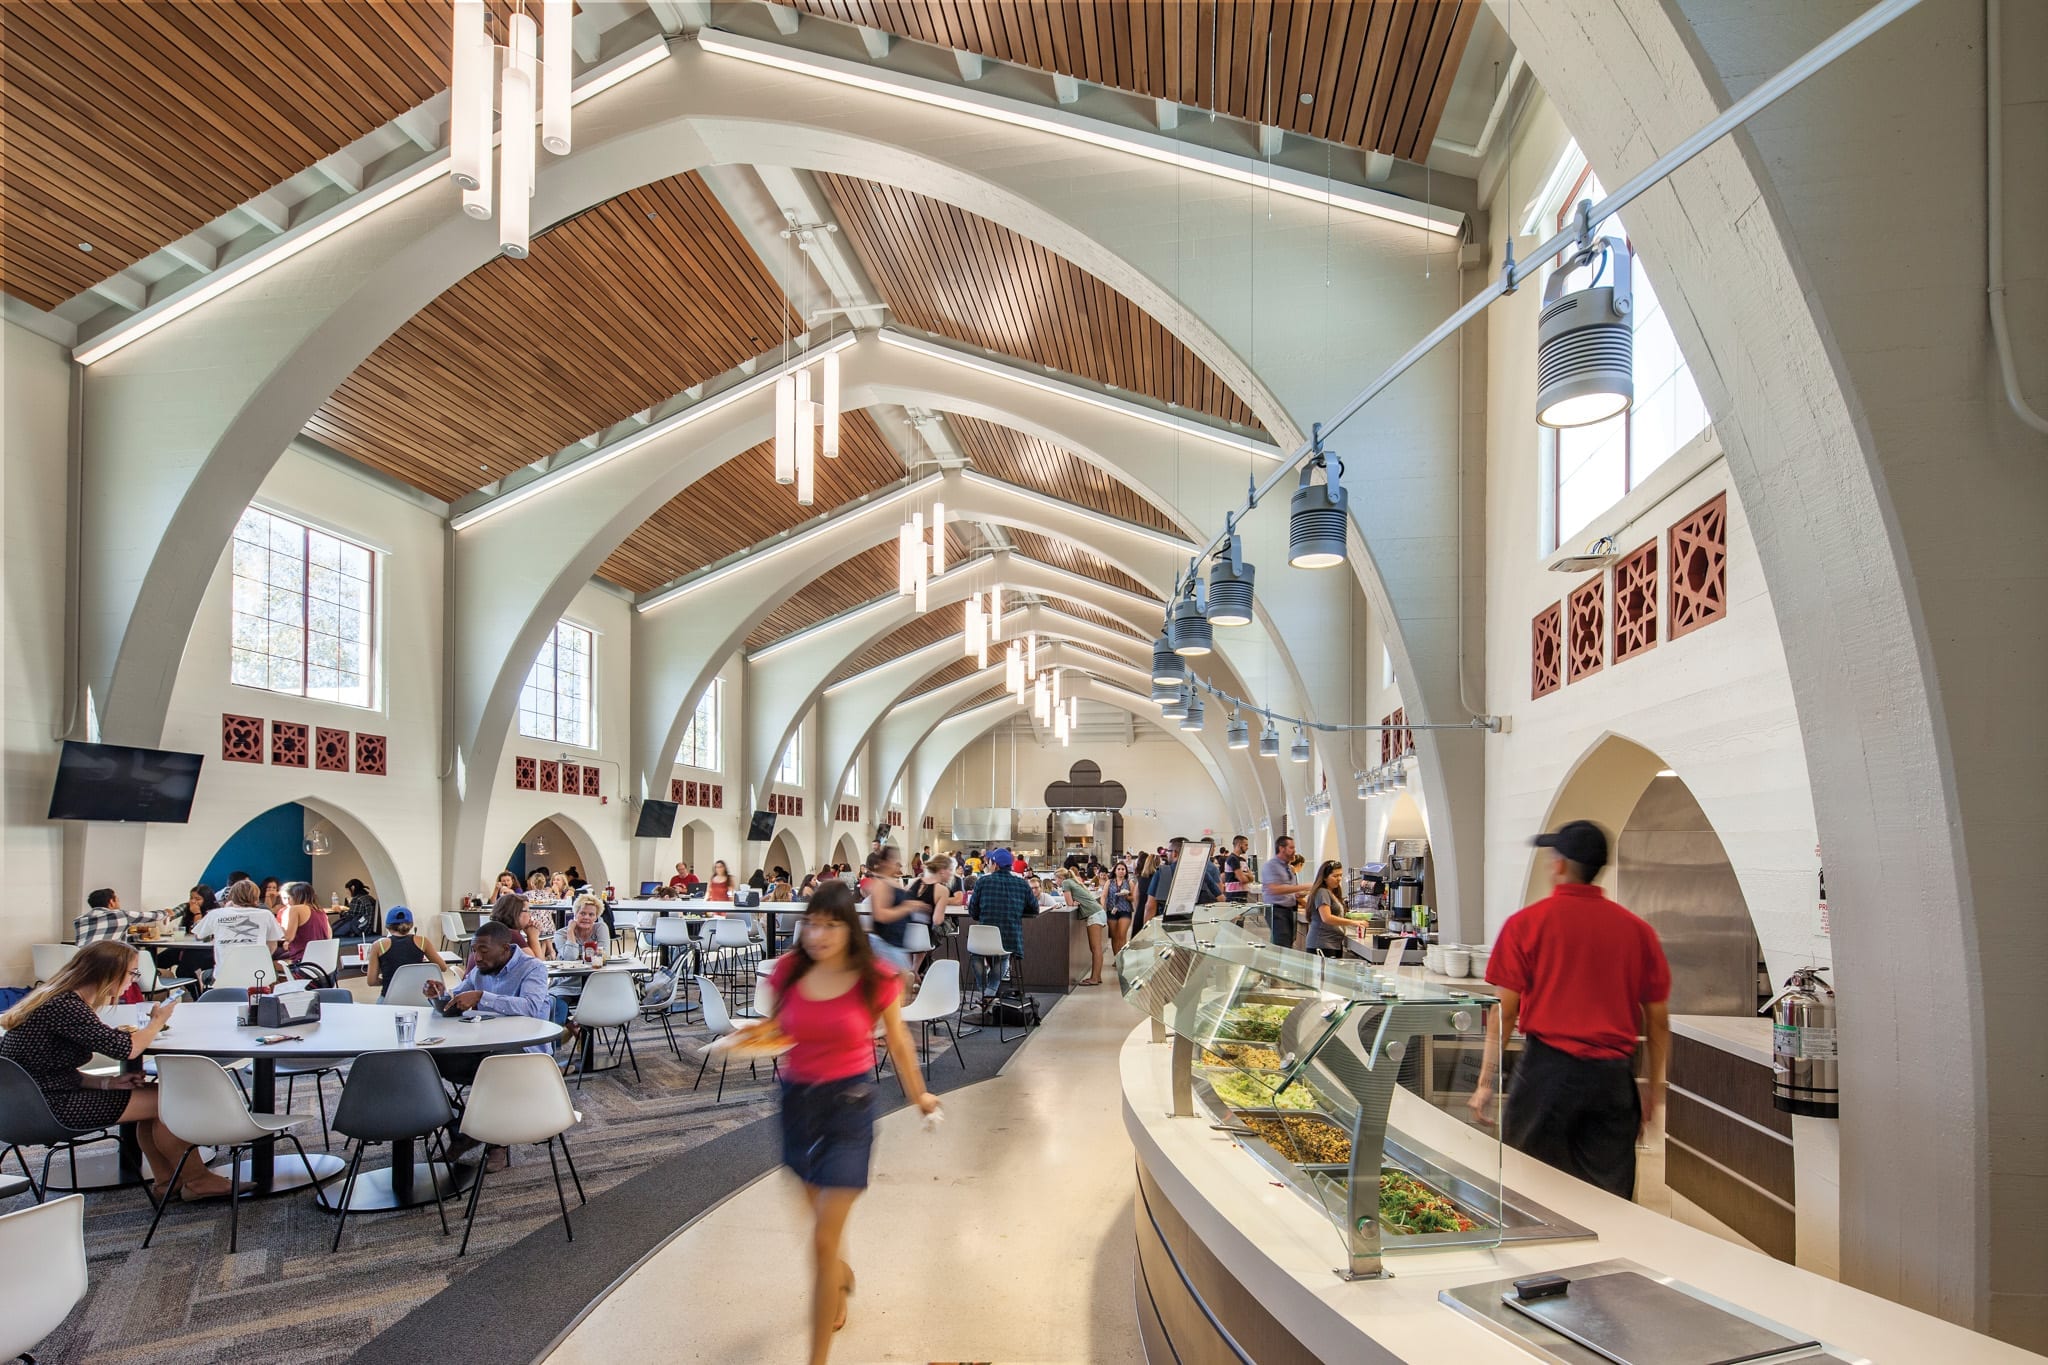 CSU Channel Islands dining with high vaulted ceilings.